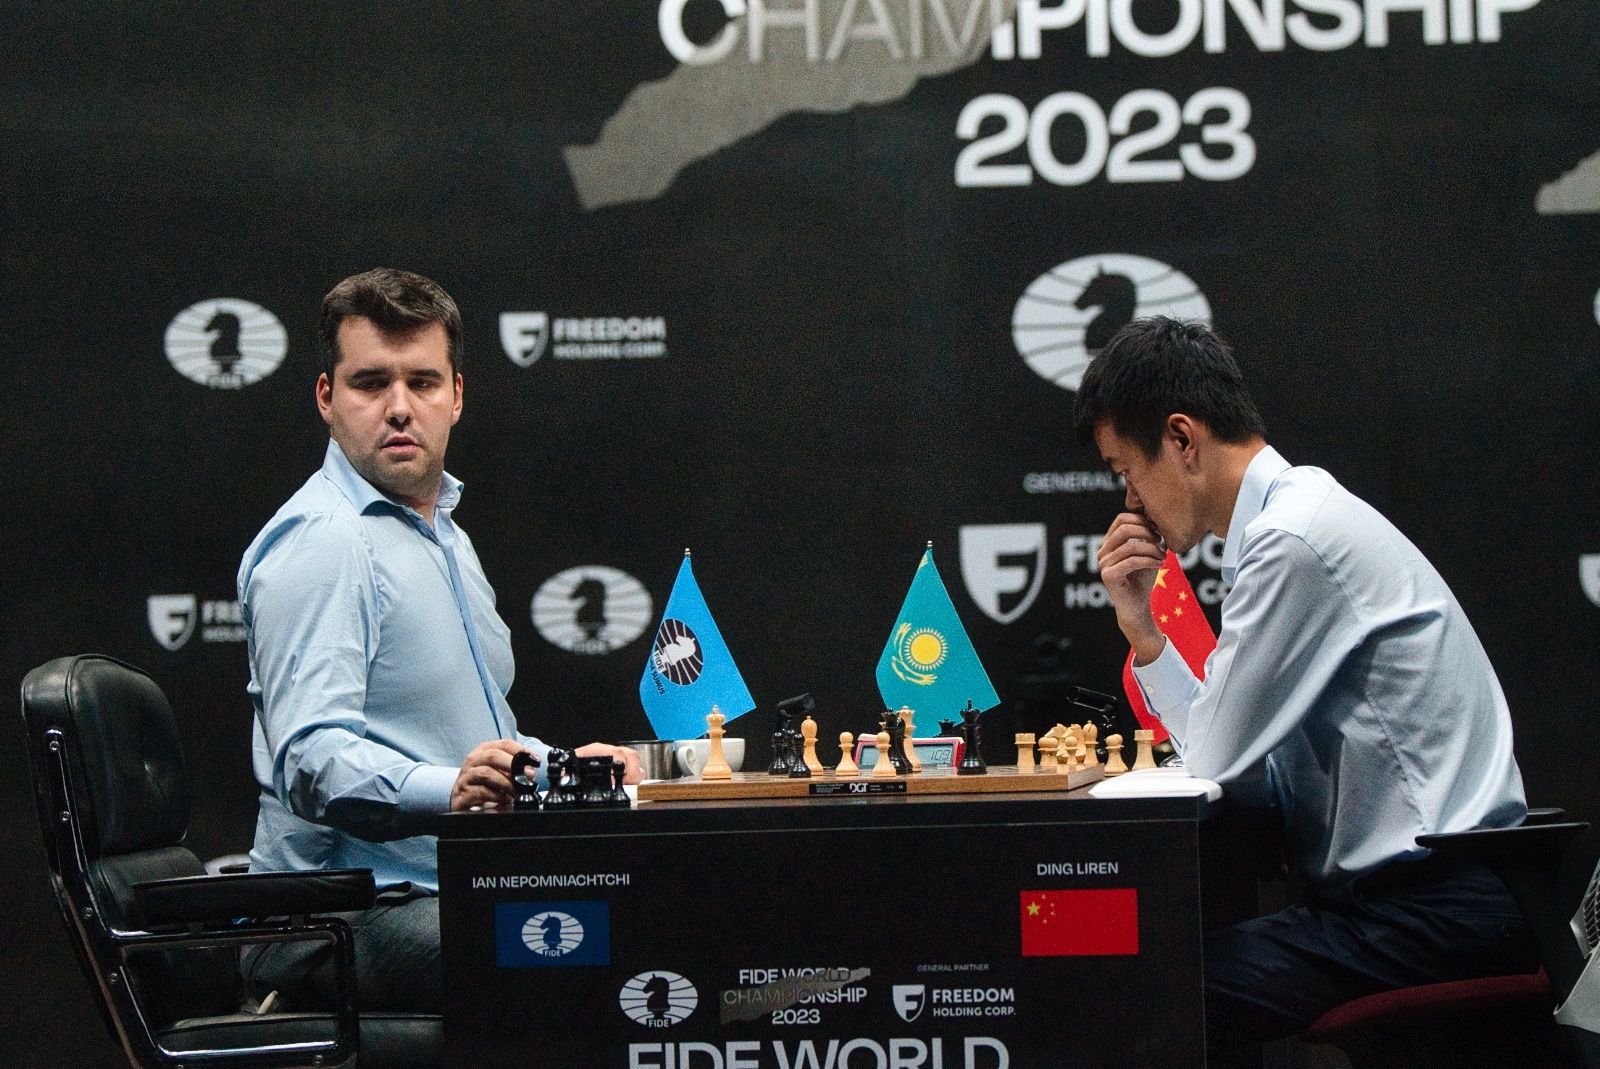 World Chess Championship: Of a thrilling showdown and the meaning of  happiness